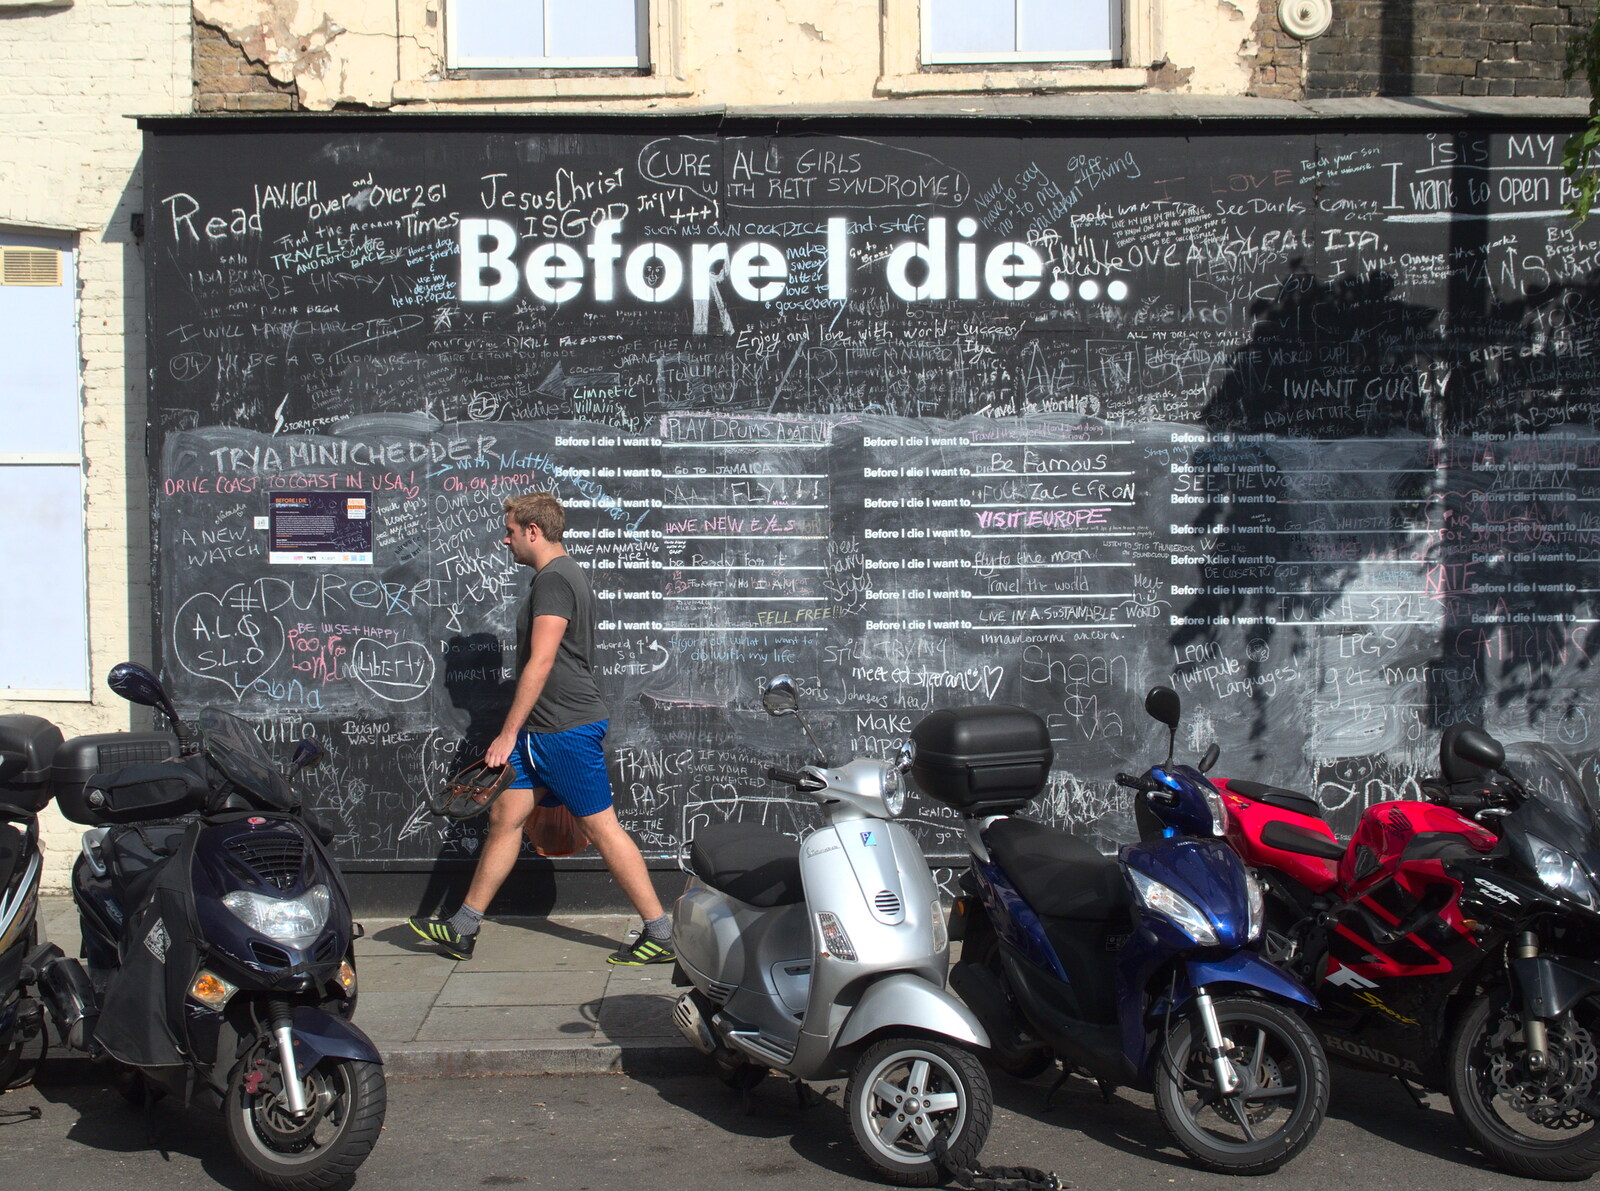 Amusing stuff on the Before I Die board  from A House Built of Wax and Diss Randomness, Southwark Street, London - 30th September 2014